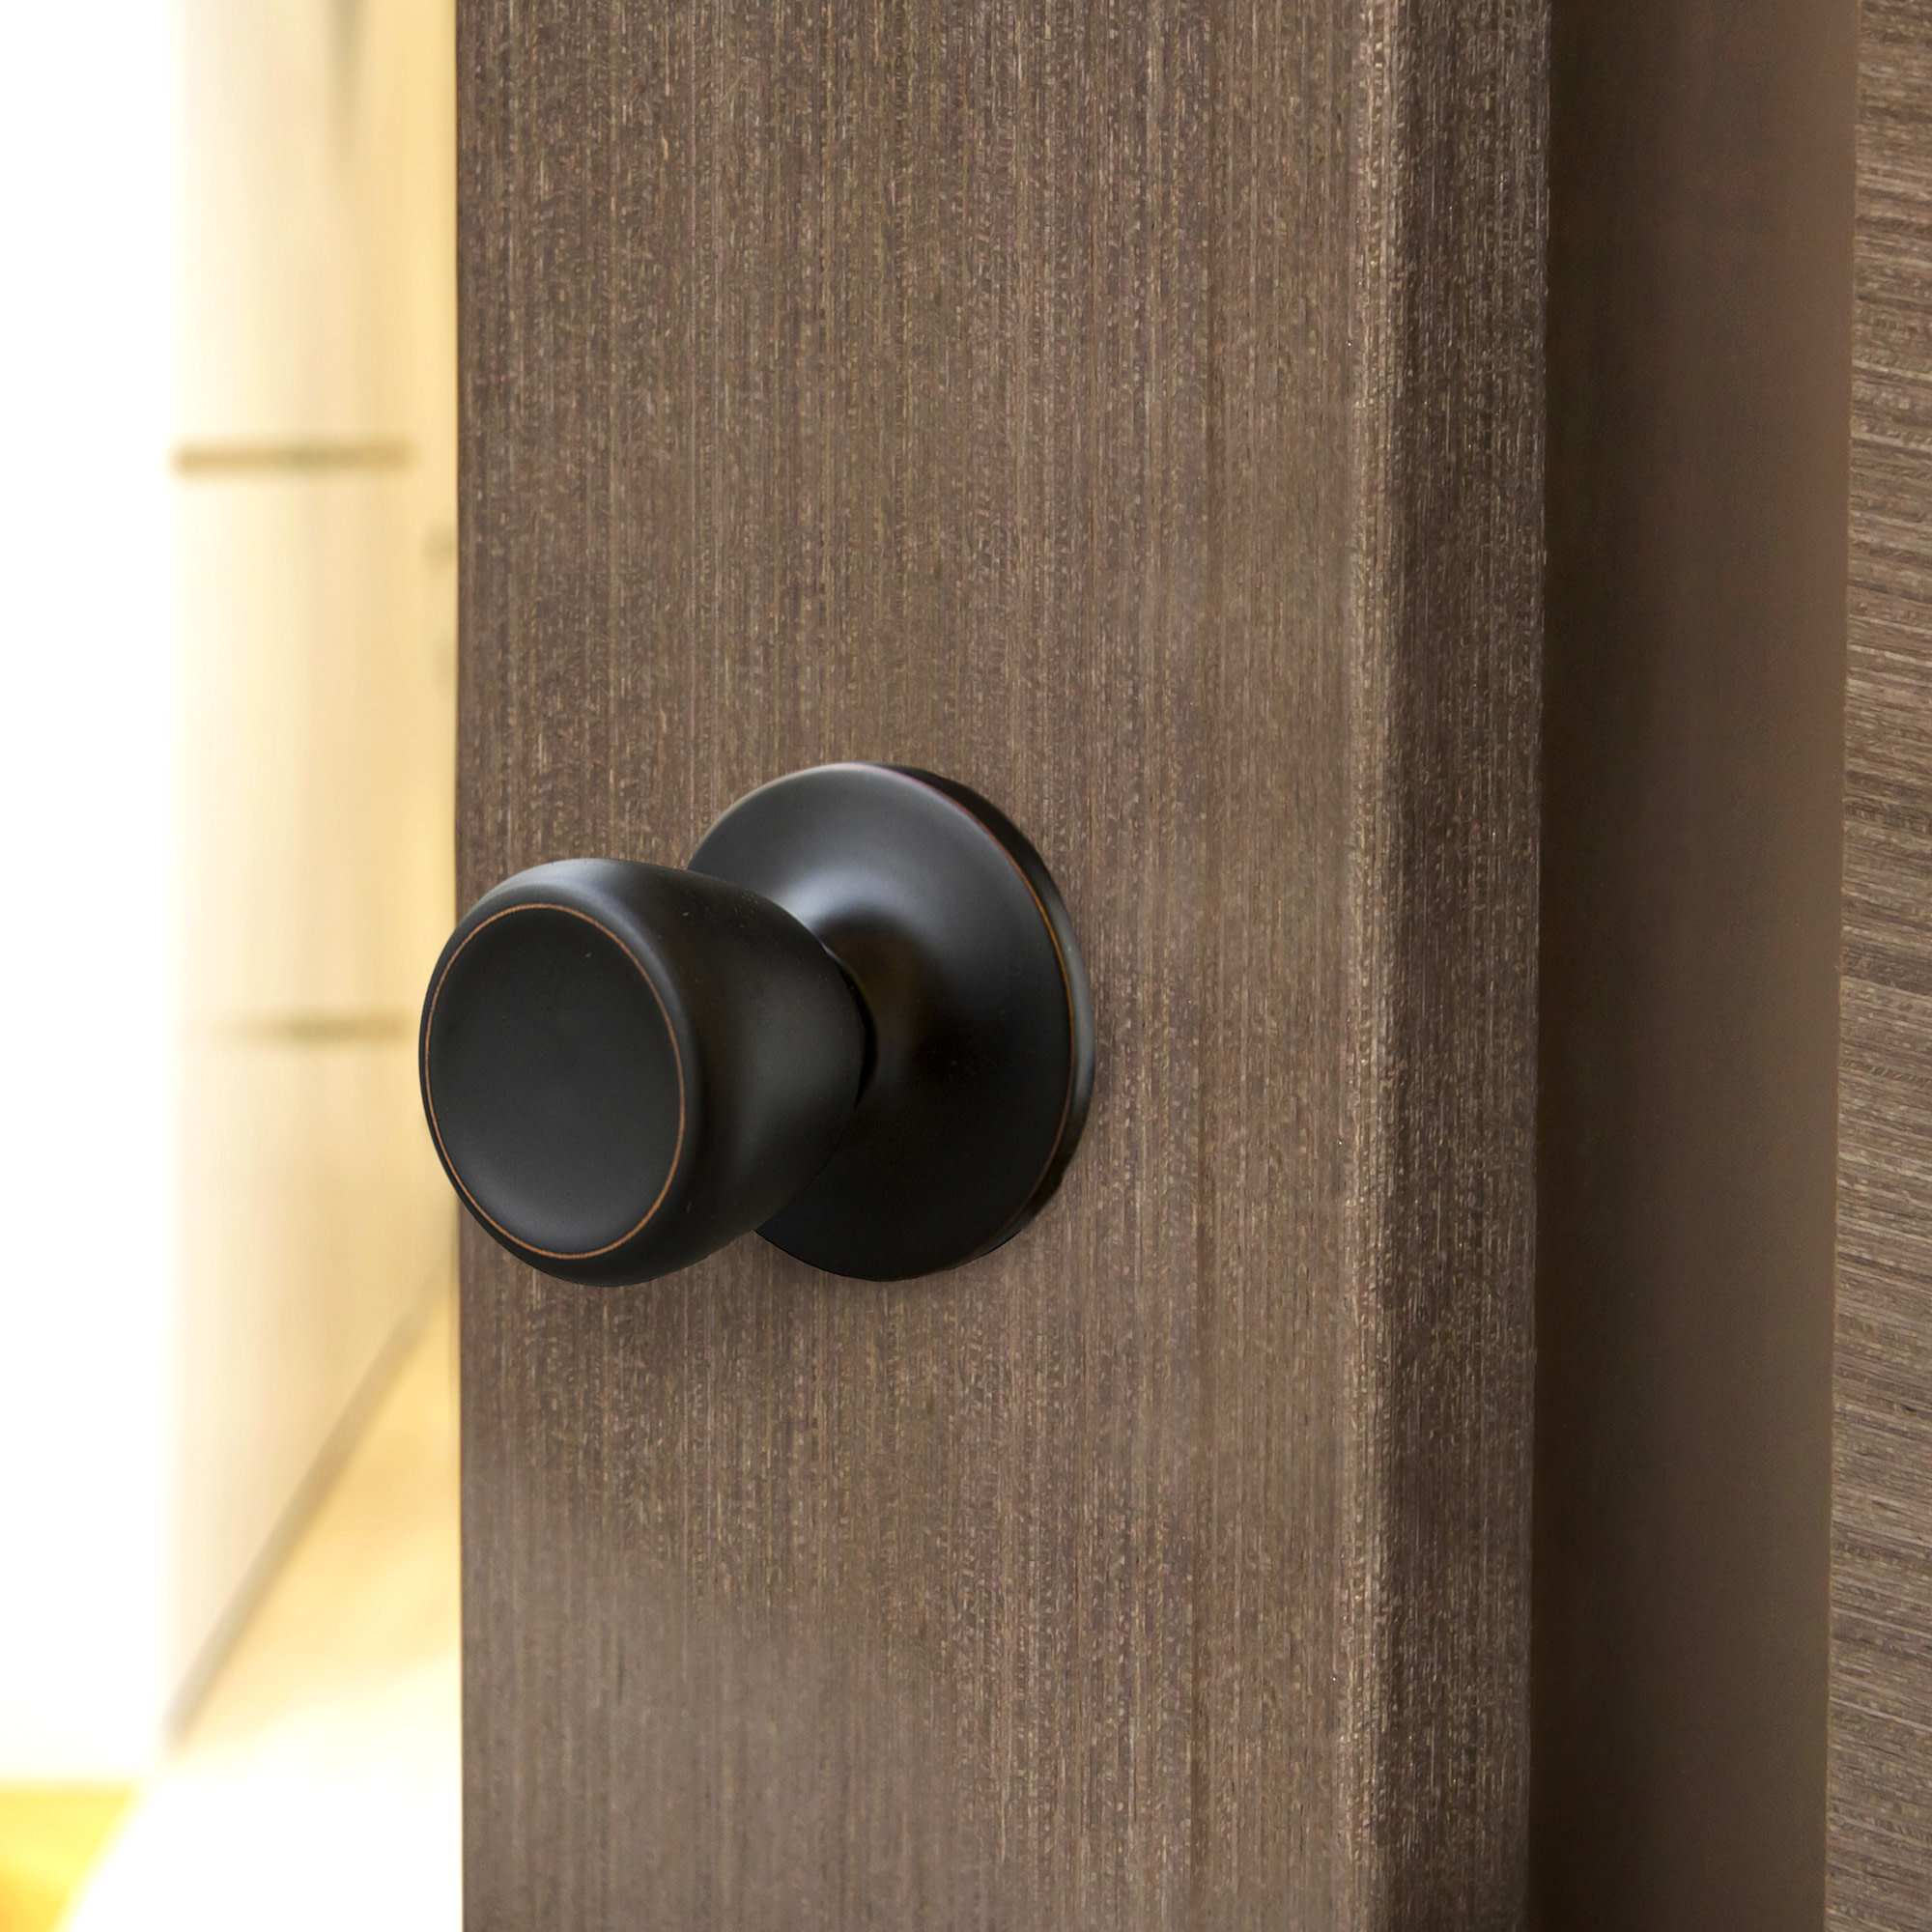 Design House 190850 Terrace Passage Hall and Closet Door Knob with Universal 6-Way Latch Oil Rubbed Bronze 12-Pack - image 3 of 16